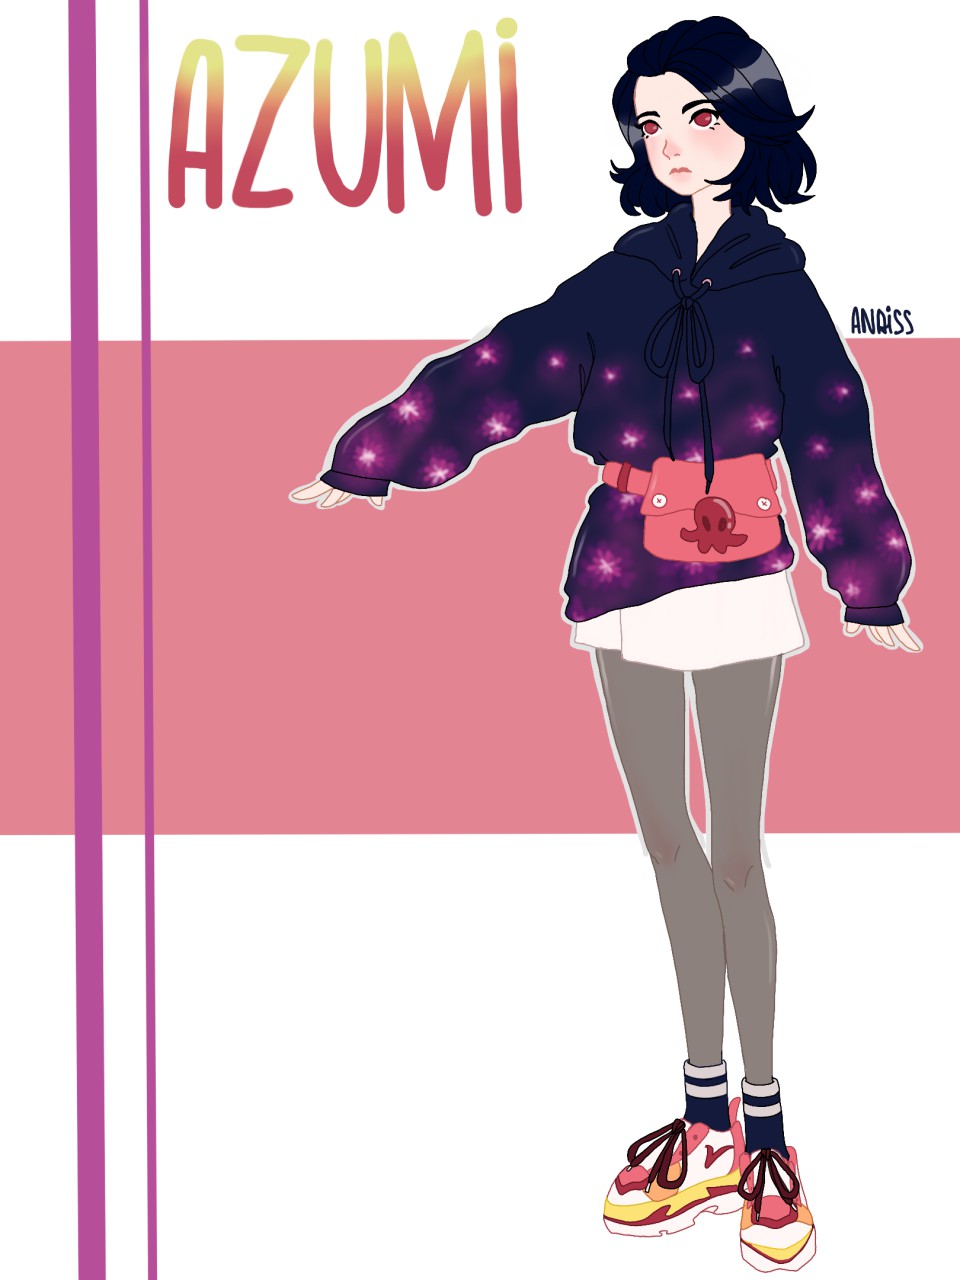 azumi_by_anaiss_adopted_By_wes.png.jpg